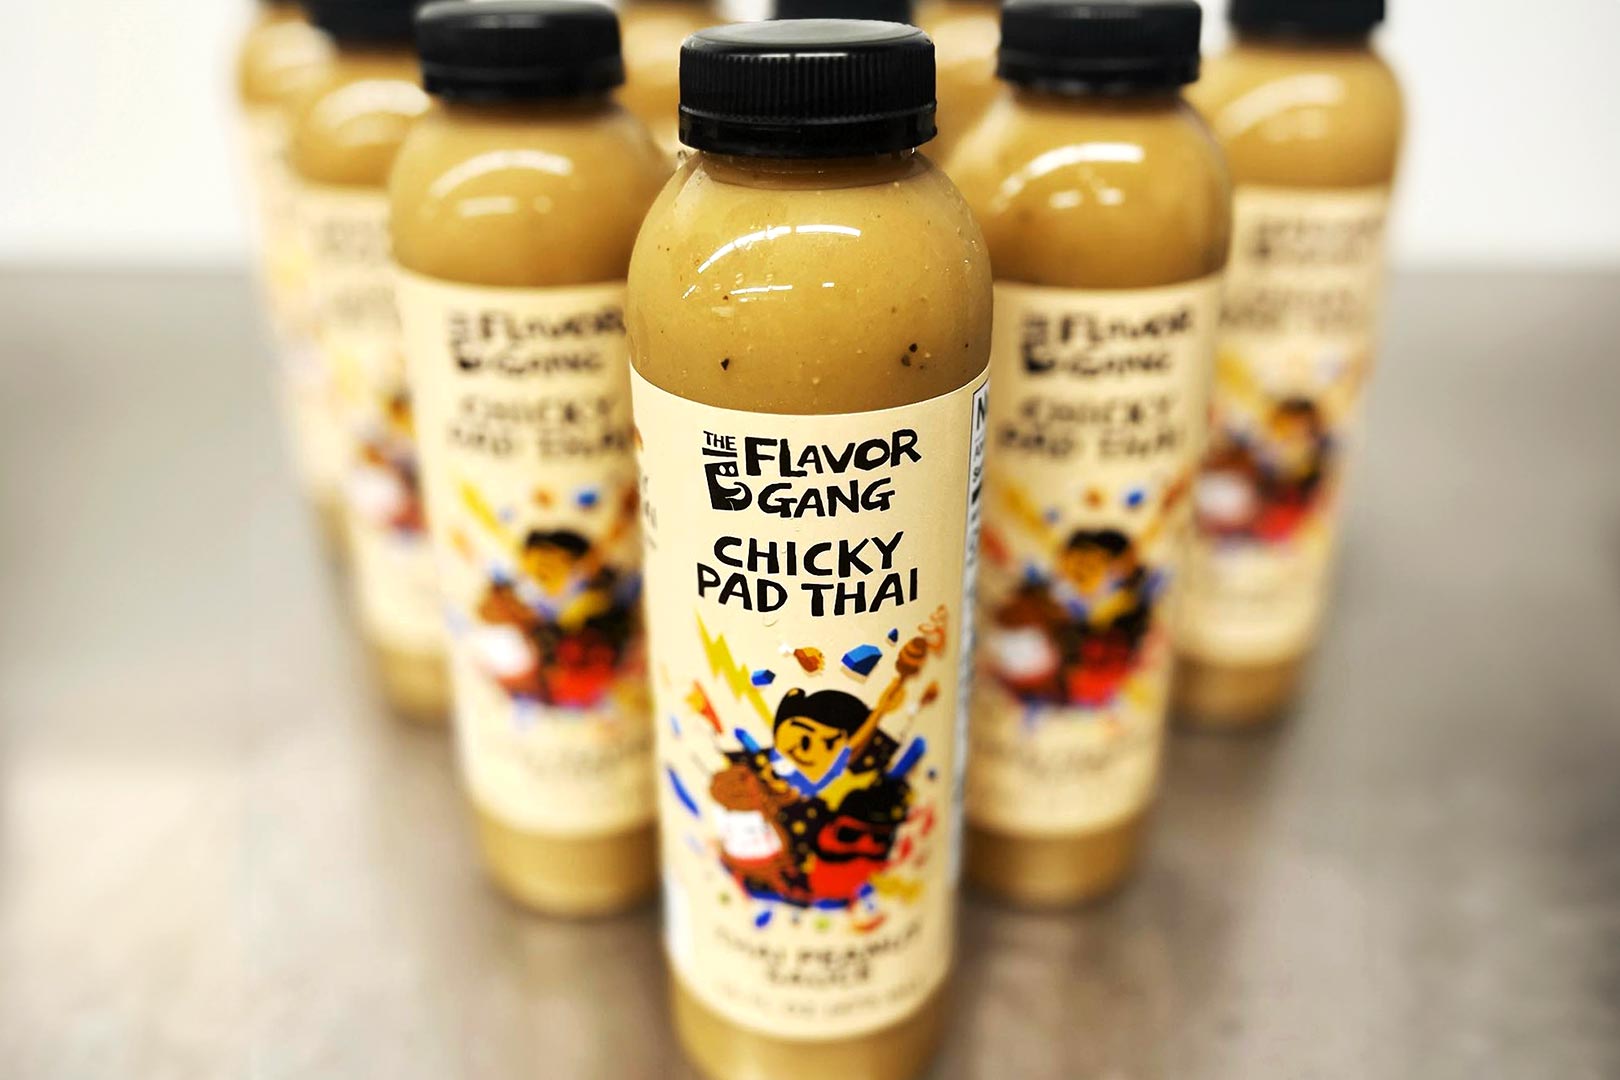 The Flavor Gang Chicky Pad Thai Sauce